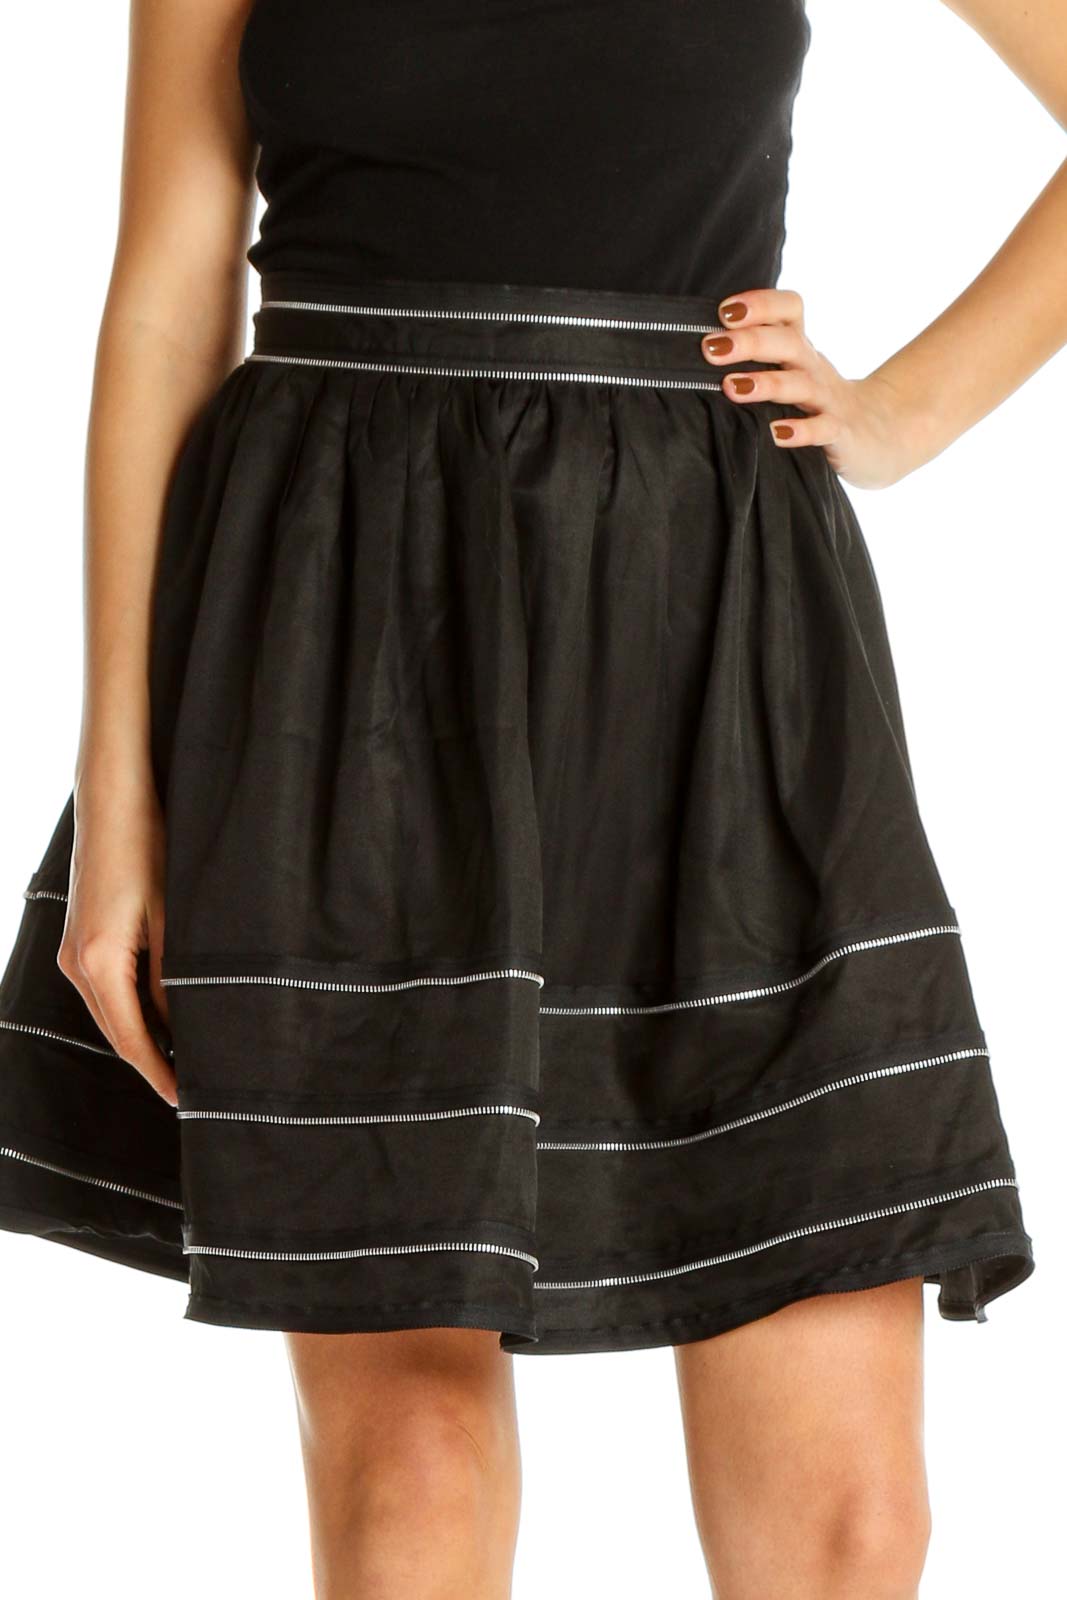 Black Solid Chic Flared Skirt Front